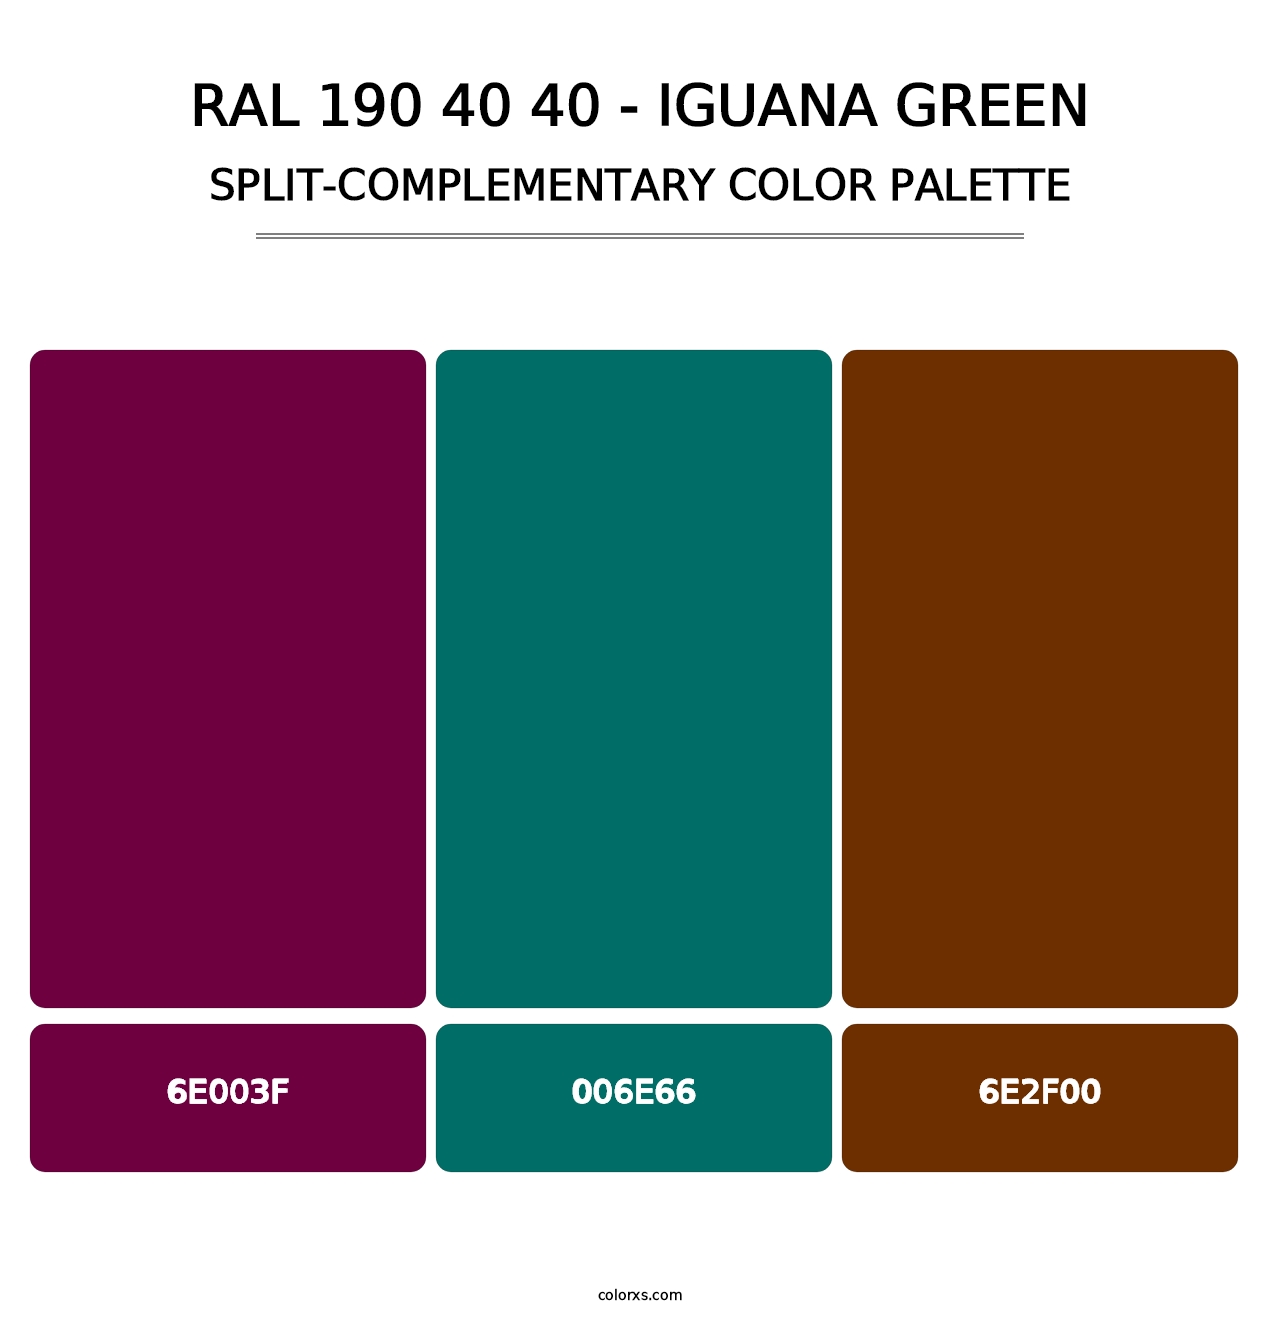 RAL 190 40 40 - Iguana Green - Split-Complementary Color Palette